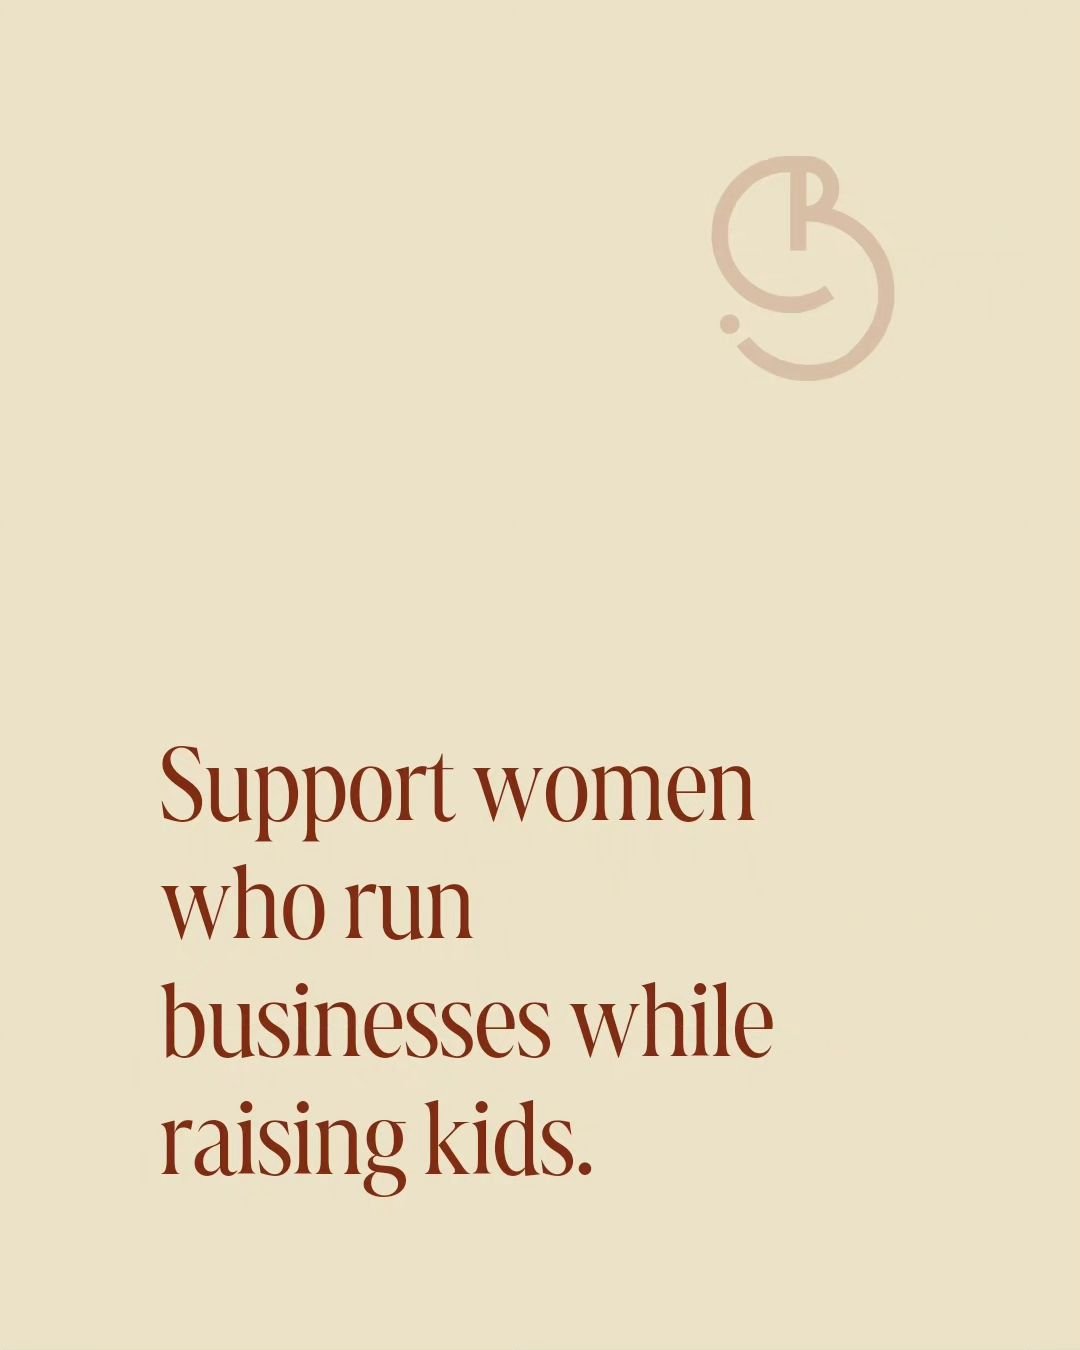 As if raising kids wasn't hard enough... We have to support others out there finding purpose beyond just being a mom. 🤍 

Tag alo the mamas who's are killin it! Show some support! 🫶🏼
.
.
#entrepreneur #womensempowerment #womeninbusinessrock #suppo